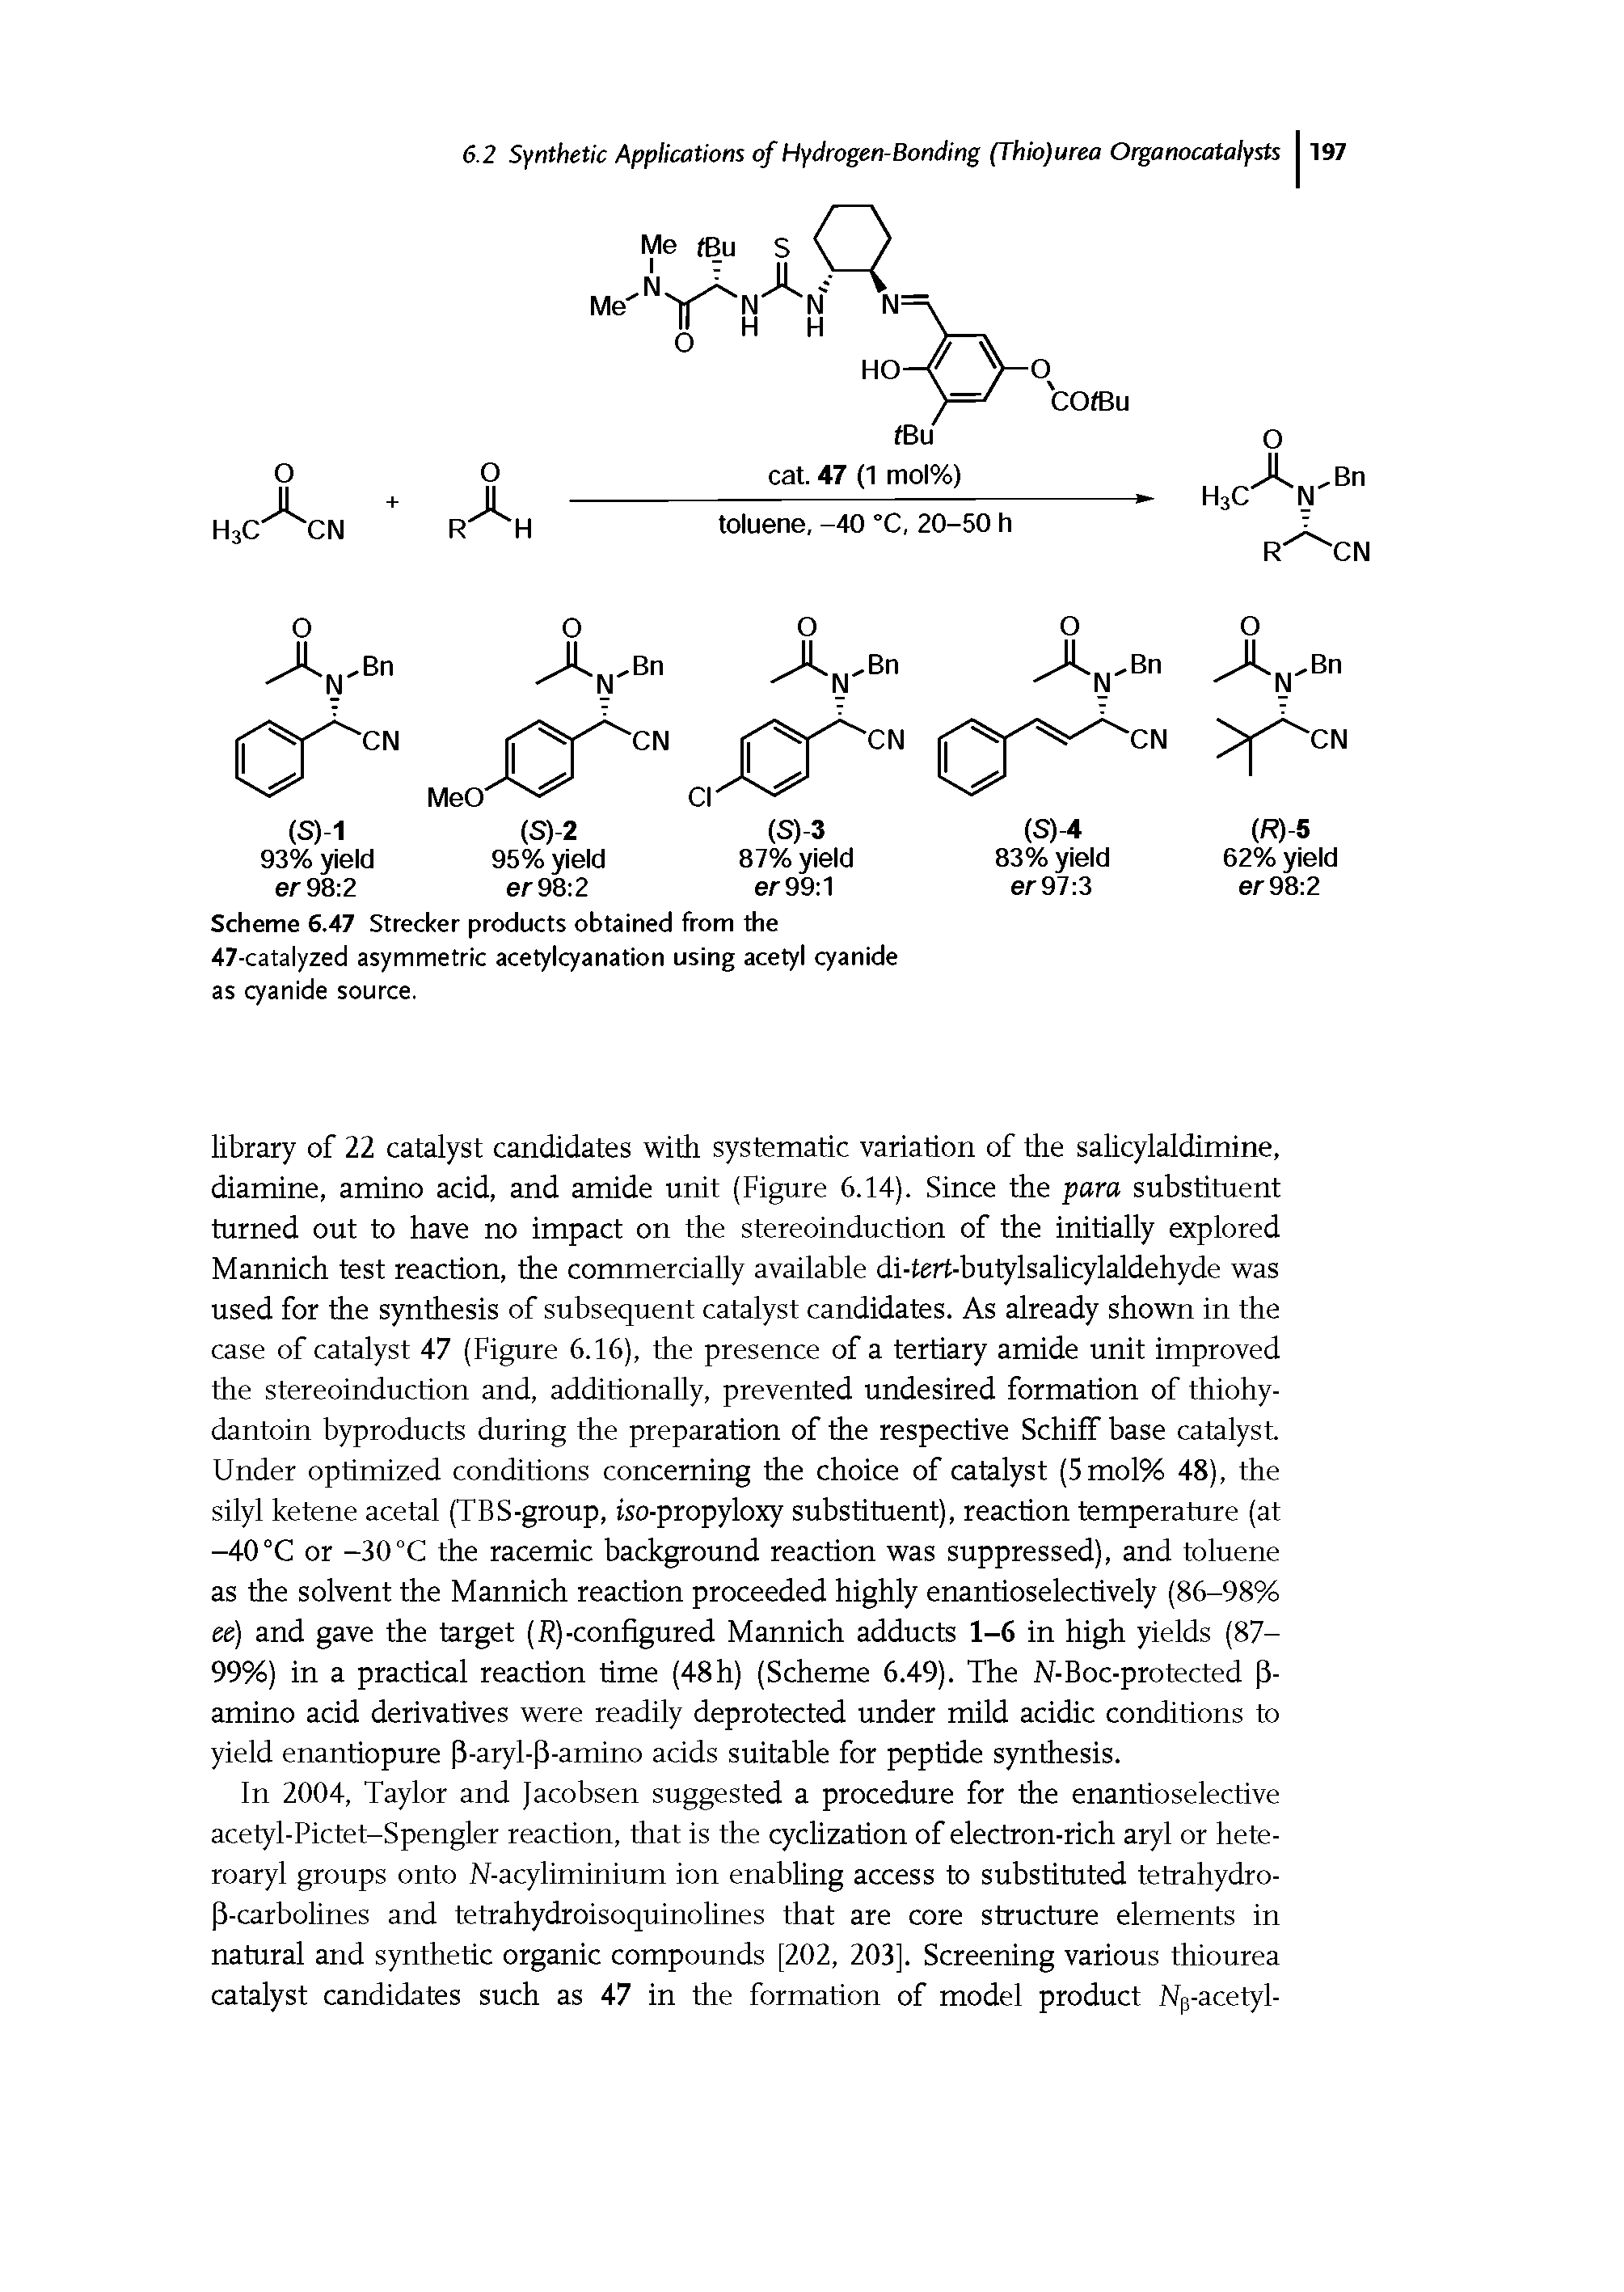 Scheme 6.47 Strecker products obtained from the 47-catalyzed asymmetric acetylcyanation using acetyl cyanide as cyanide source.